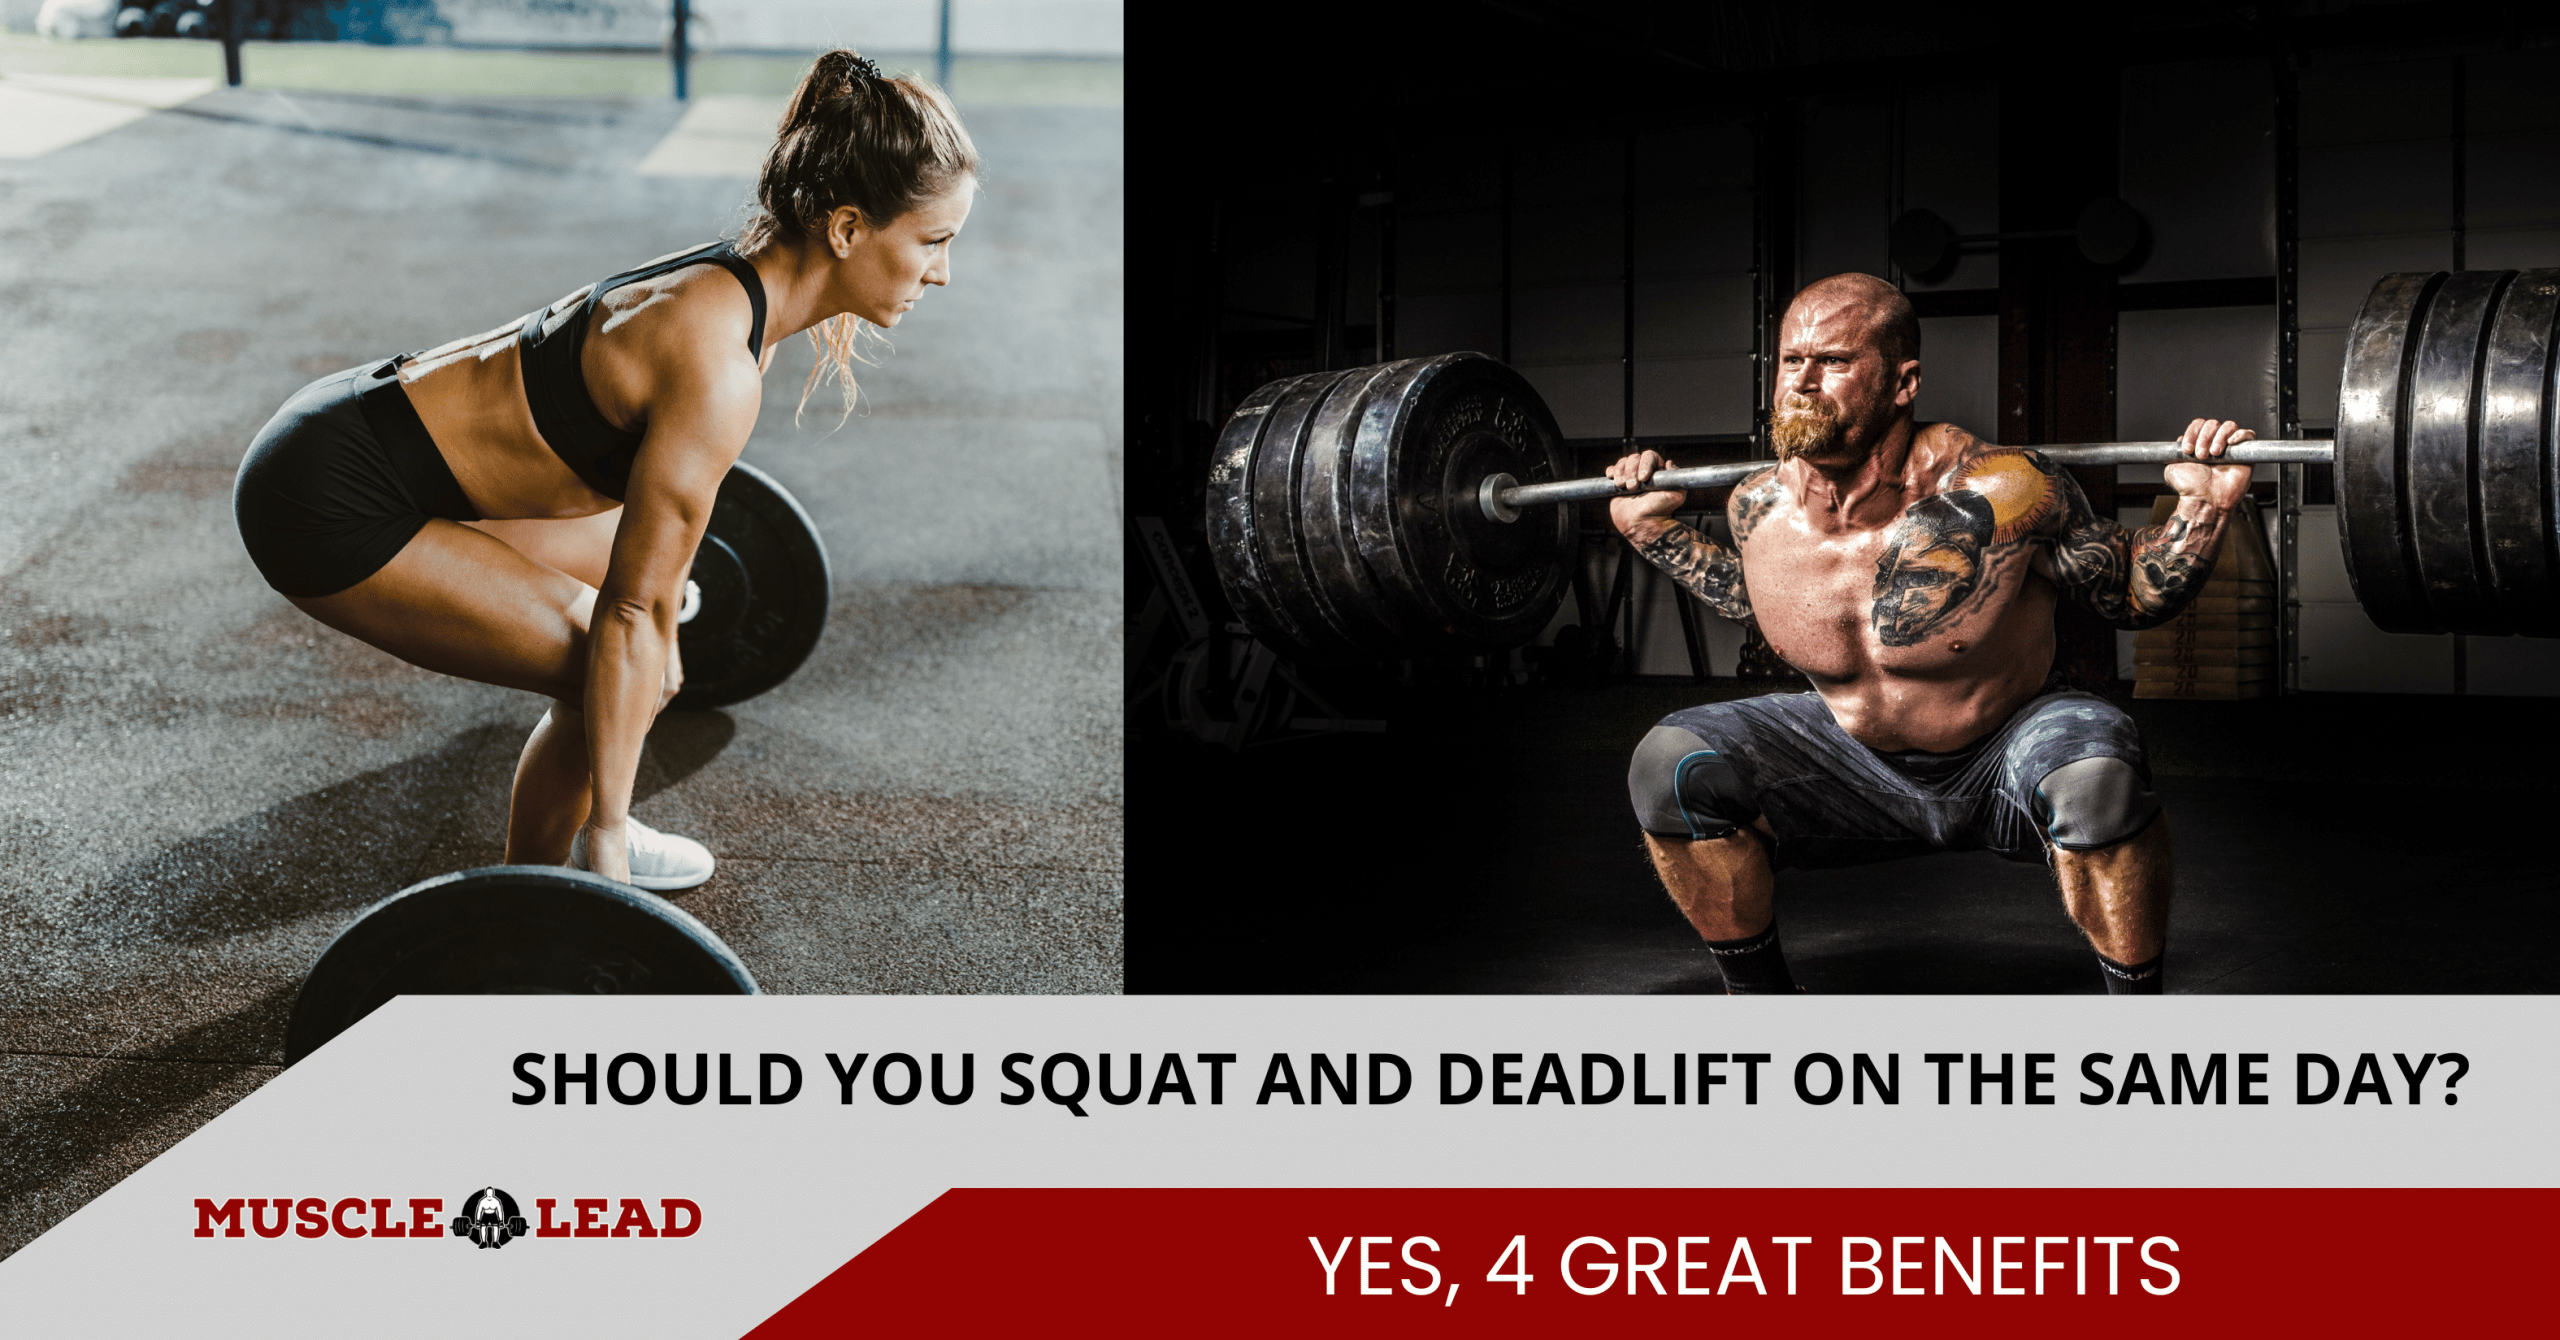 Should You Squat and Deadlift on the Same Day 4 Great Benefits